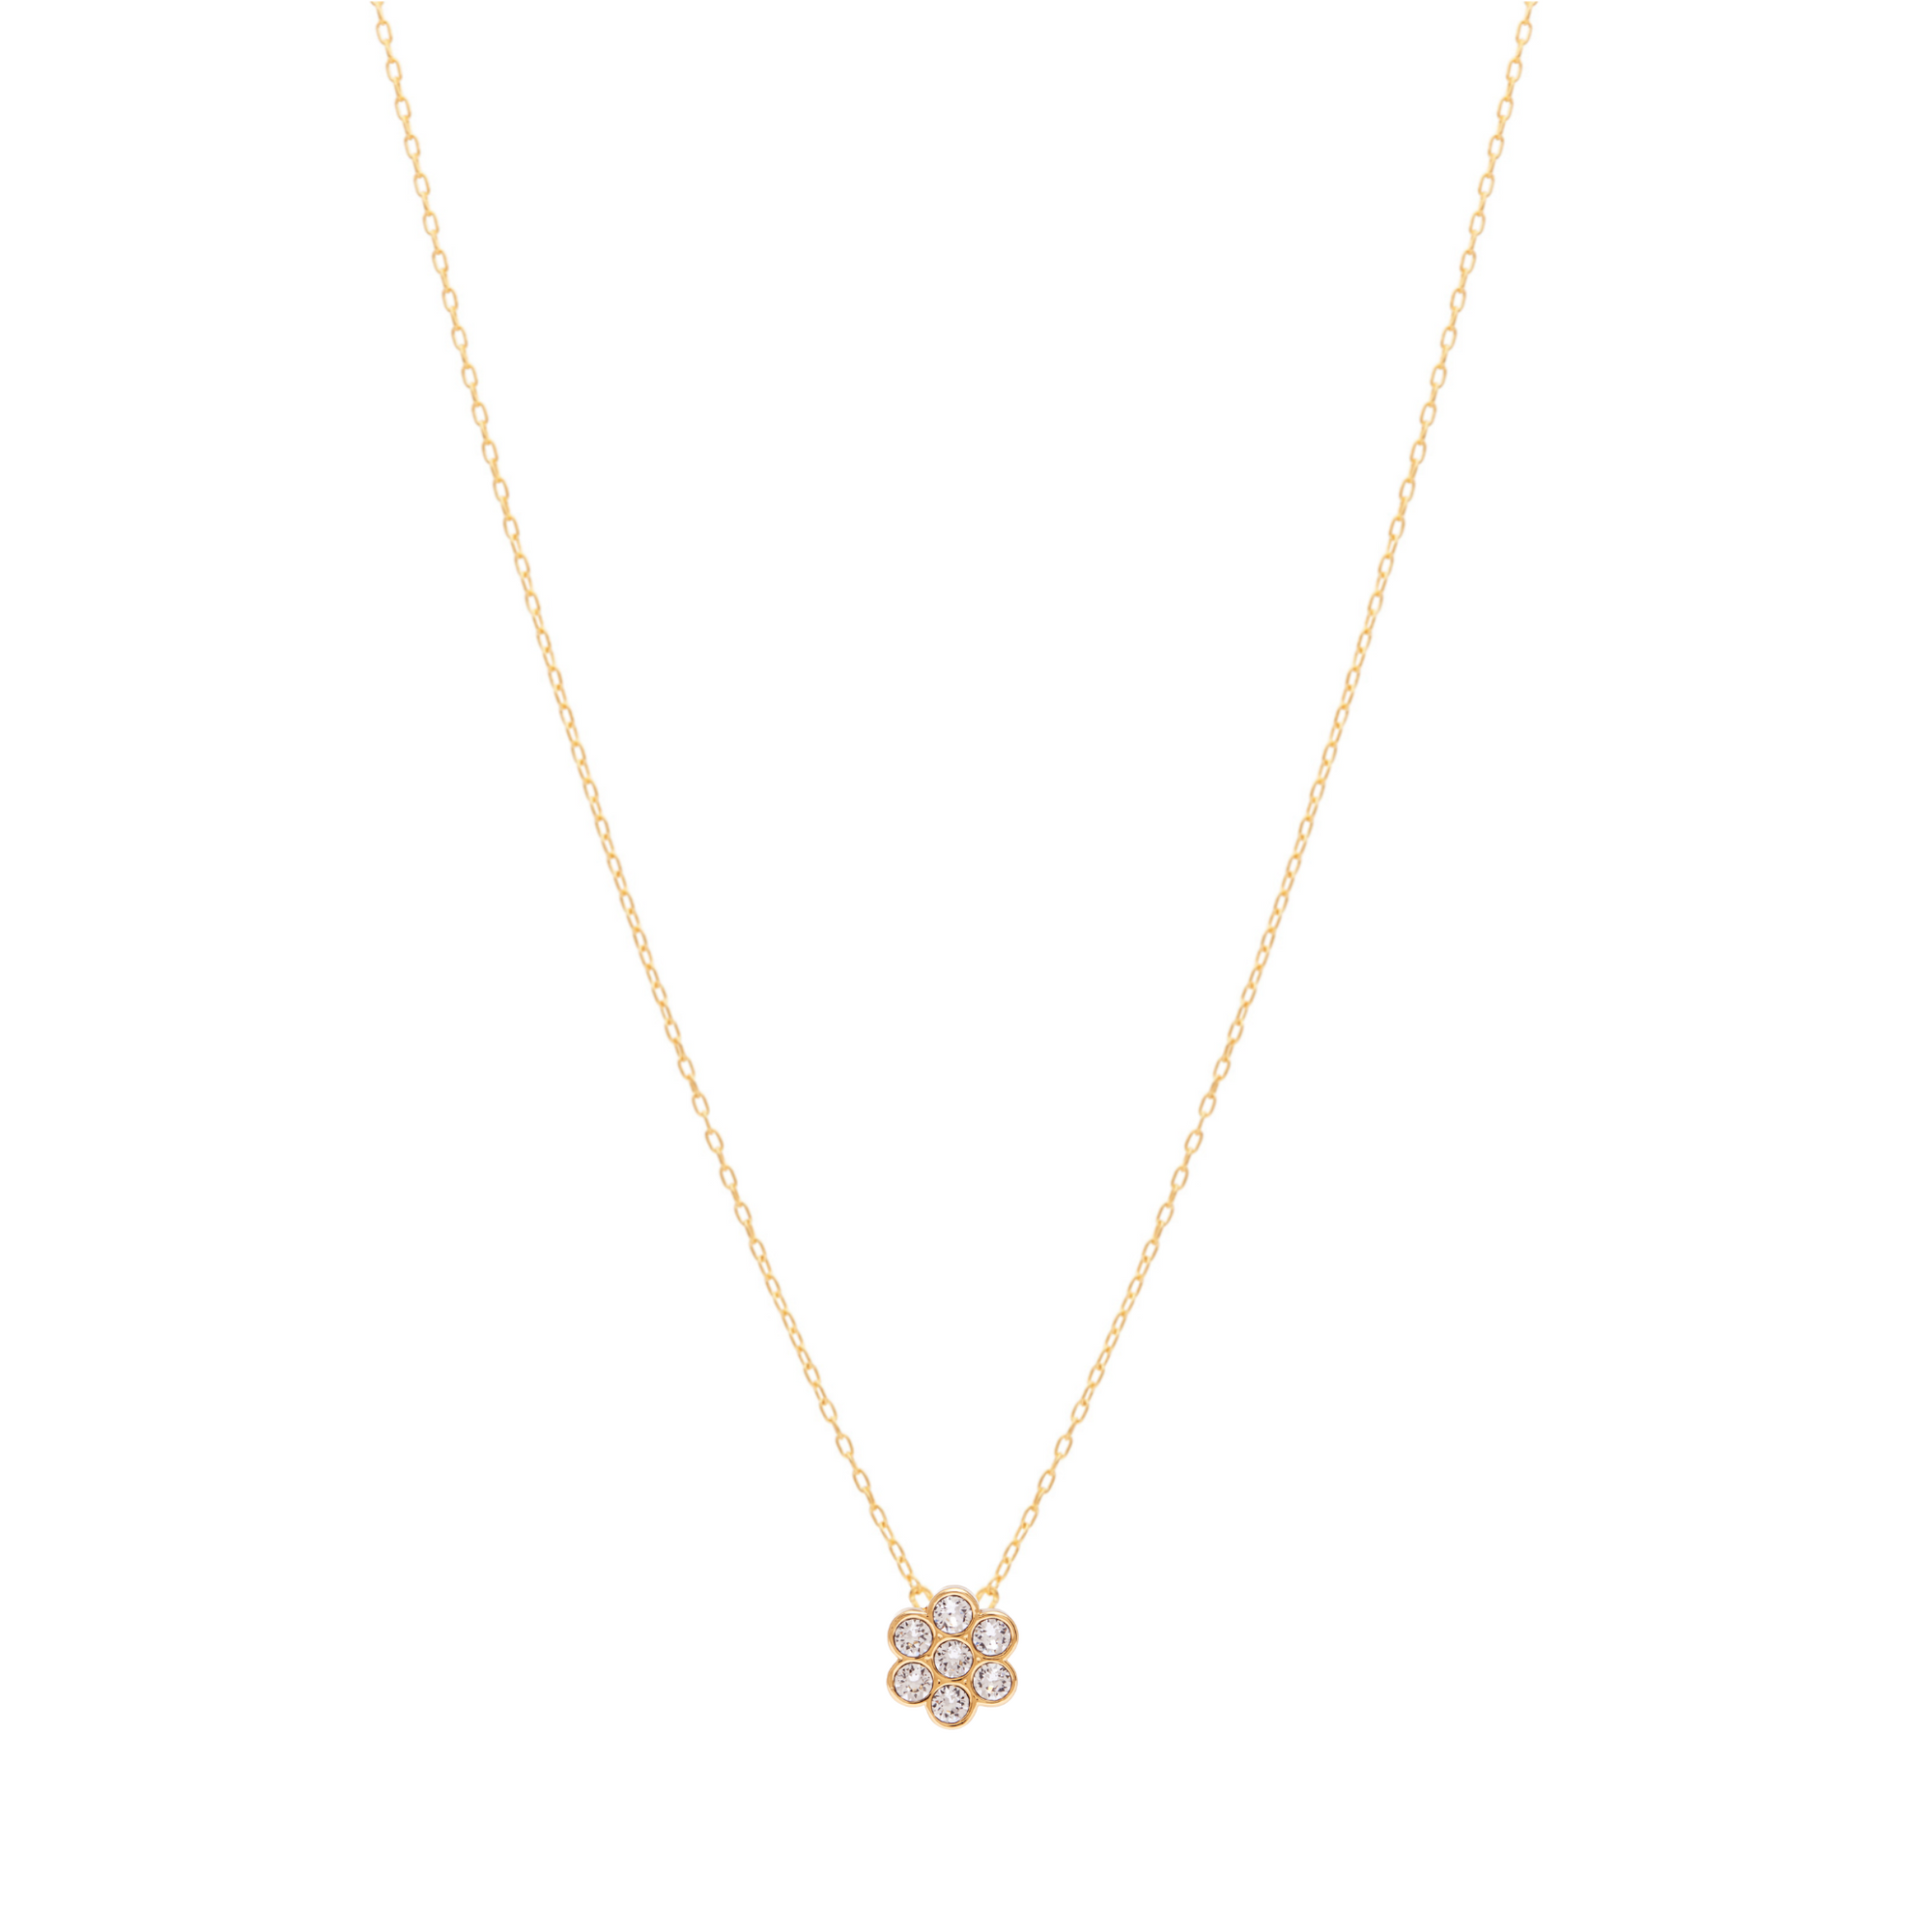 Lane Necklace in Gold